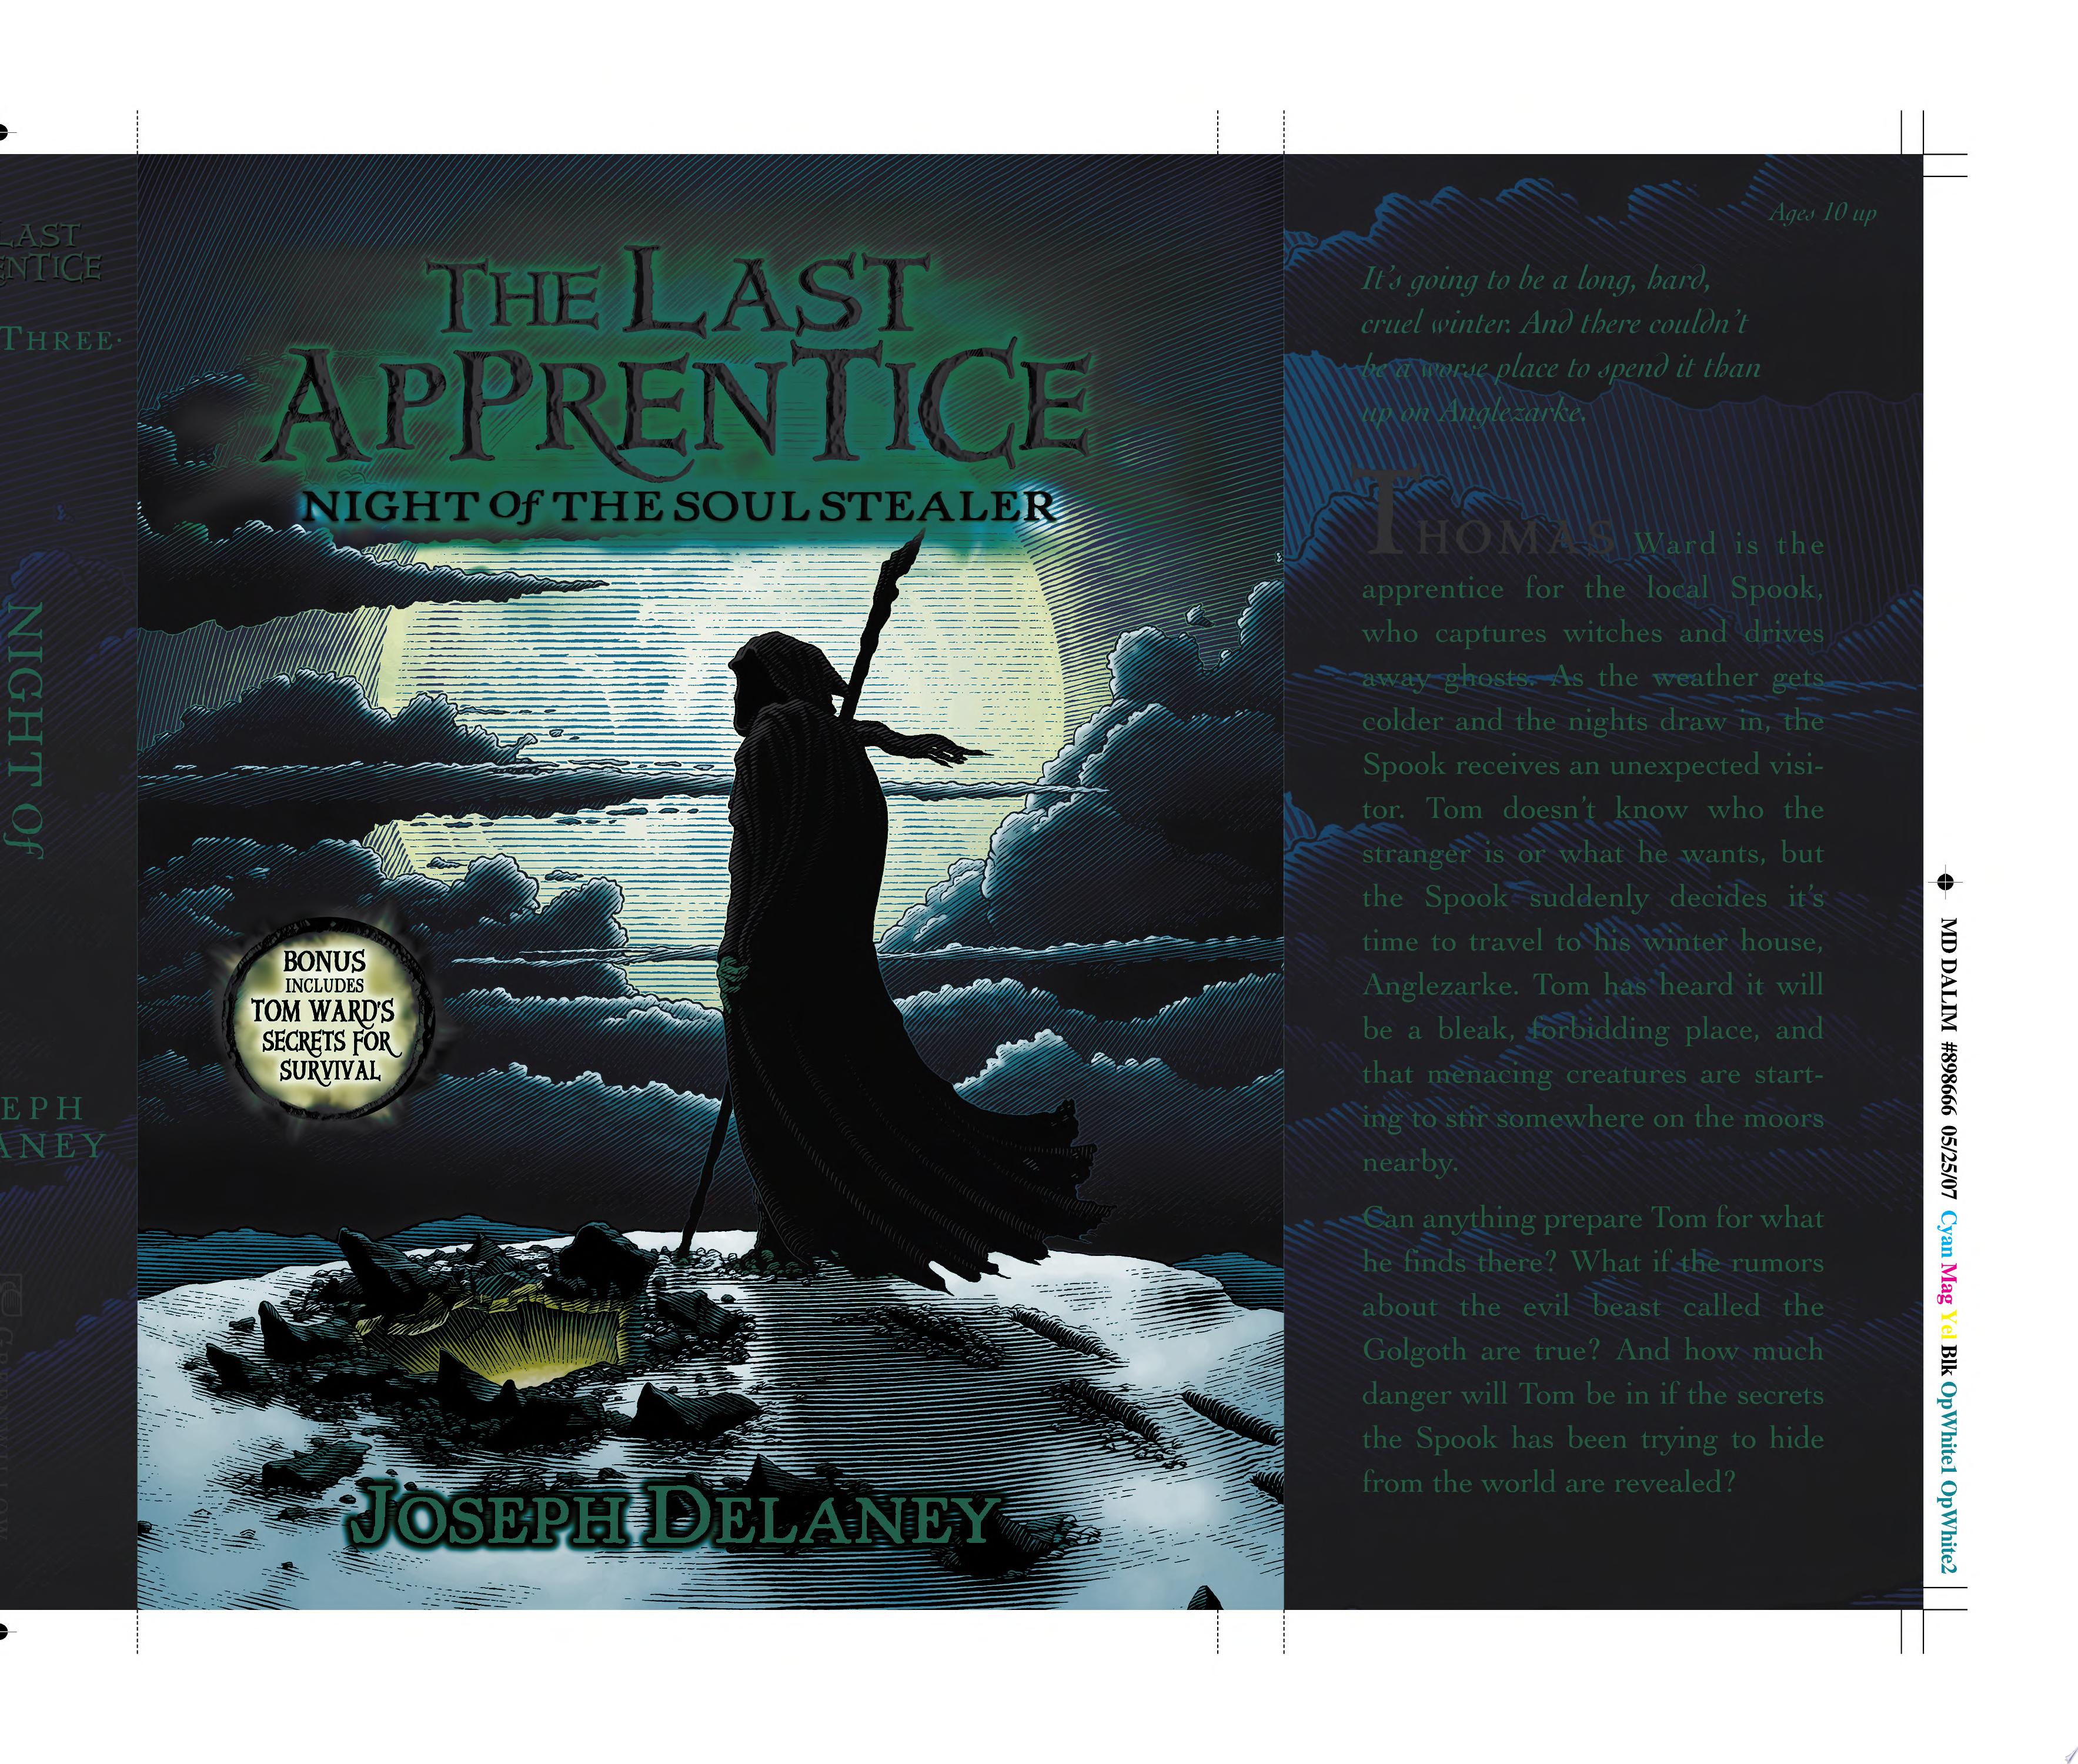 Image for "The Last Apprentice: Night of the Soul Stealer"